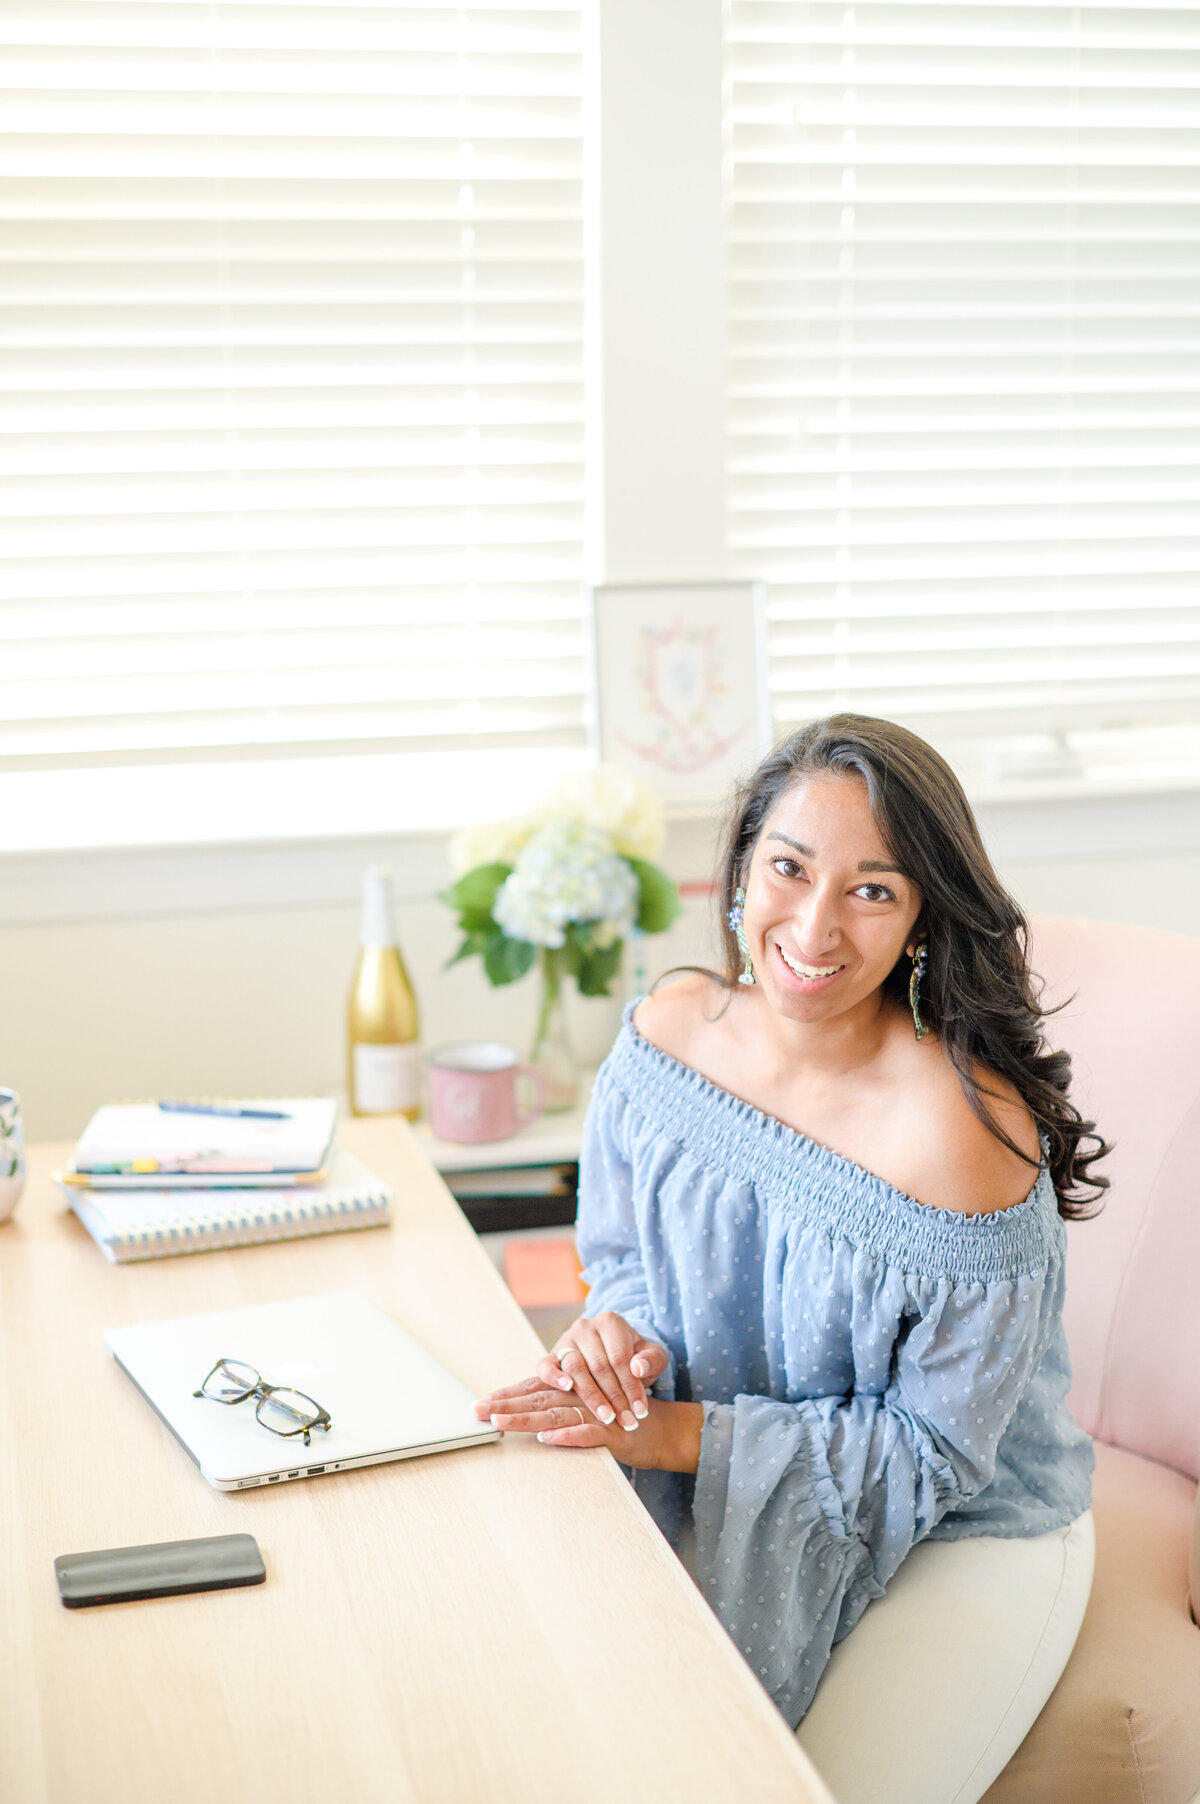 Manali Photography is a Charlottesville based photography educator, brand photographer, and multicultural wedding photographer. In her brand session, we dove deep into all of her behind the scenes processes to tell the story of her unique creative brand.